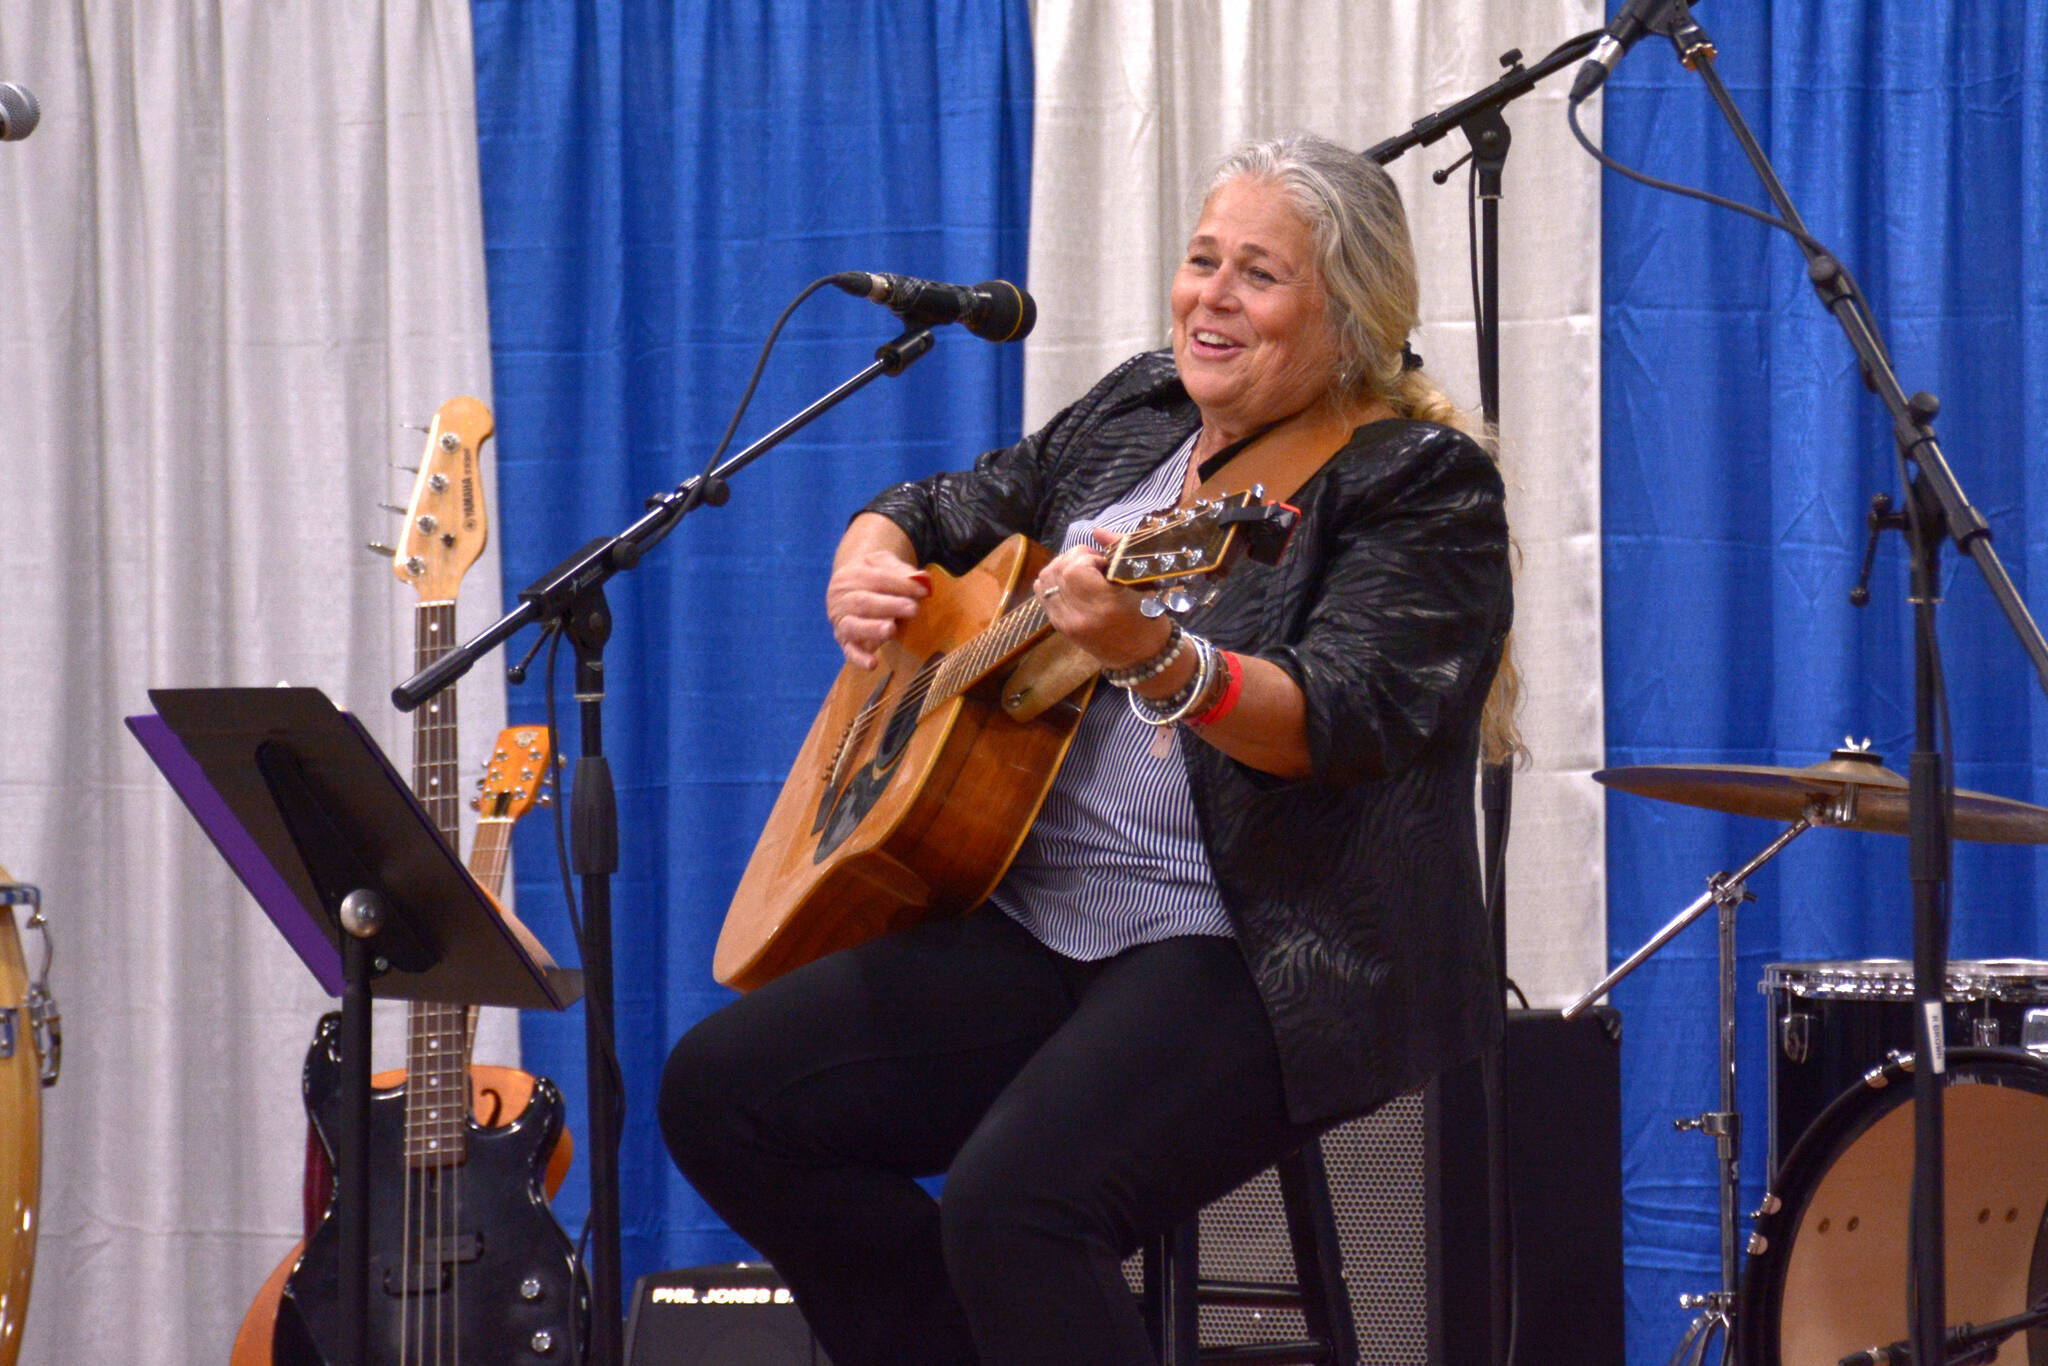 Throughout the weekend, talented musicians performed on stage for the Fall Fair crowds. (Photo by Kelsey Yates)